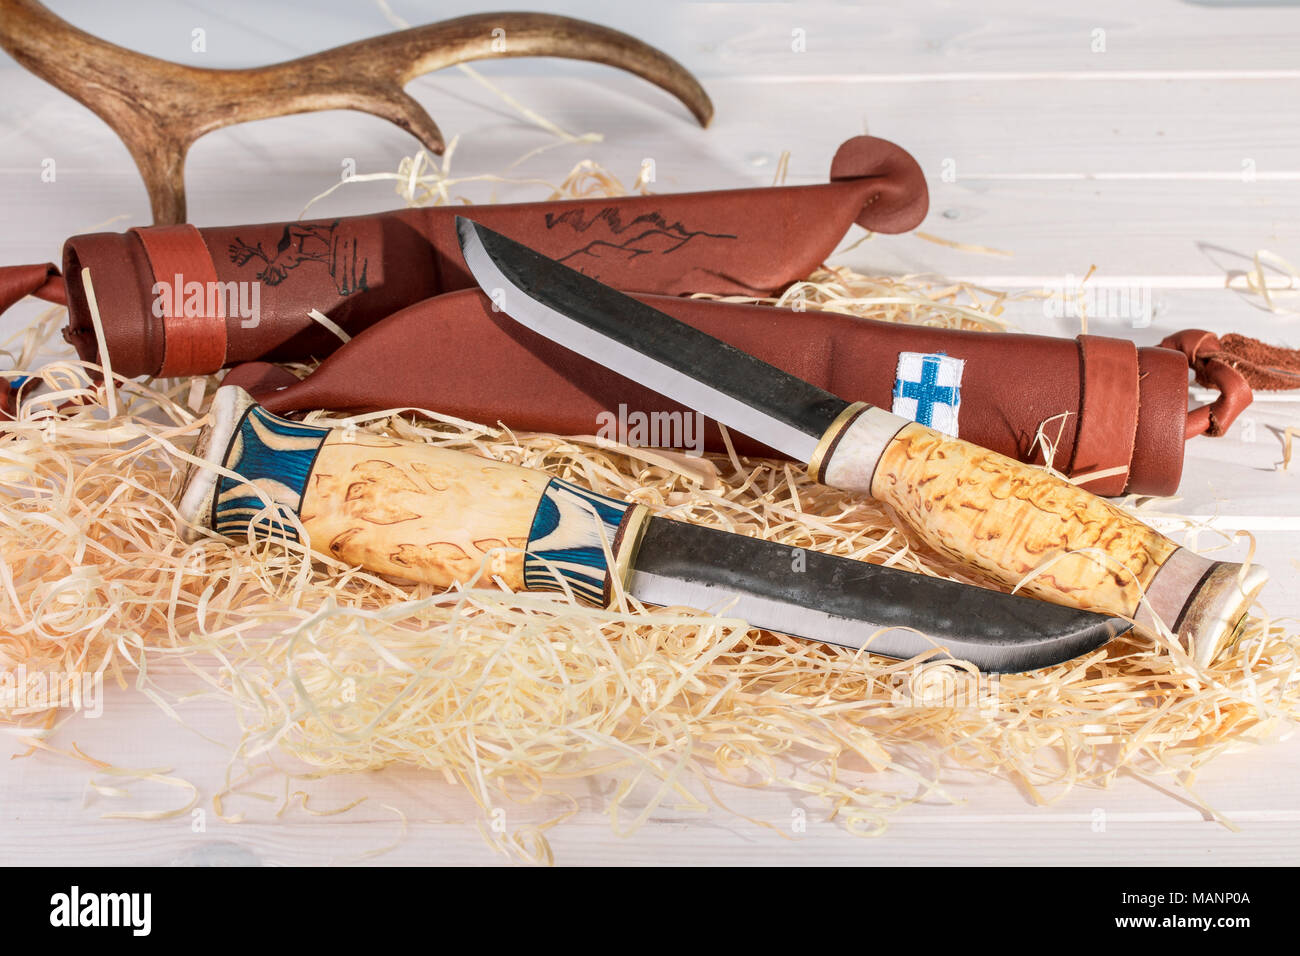 Traditional Finnish Belt Knives (Puukko) With Curving Cutting Edge And Leather Sheath Hand Crafted From Wood, Reindeer Horn And Steel, Finland's 100 Y Stock Photo